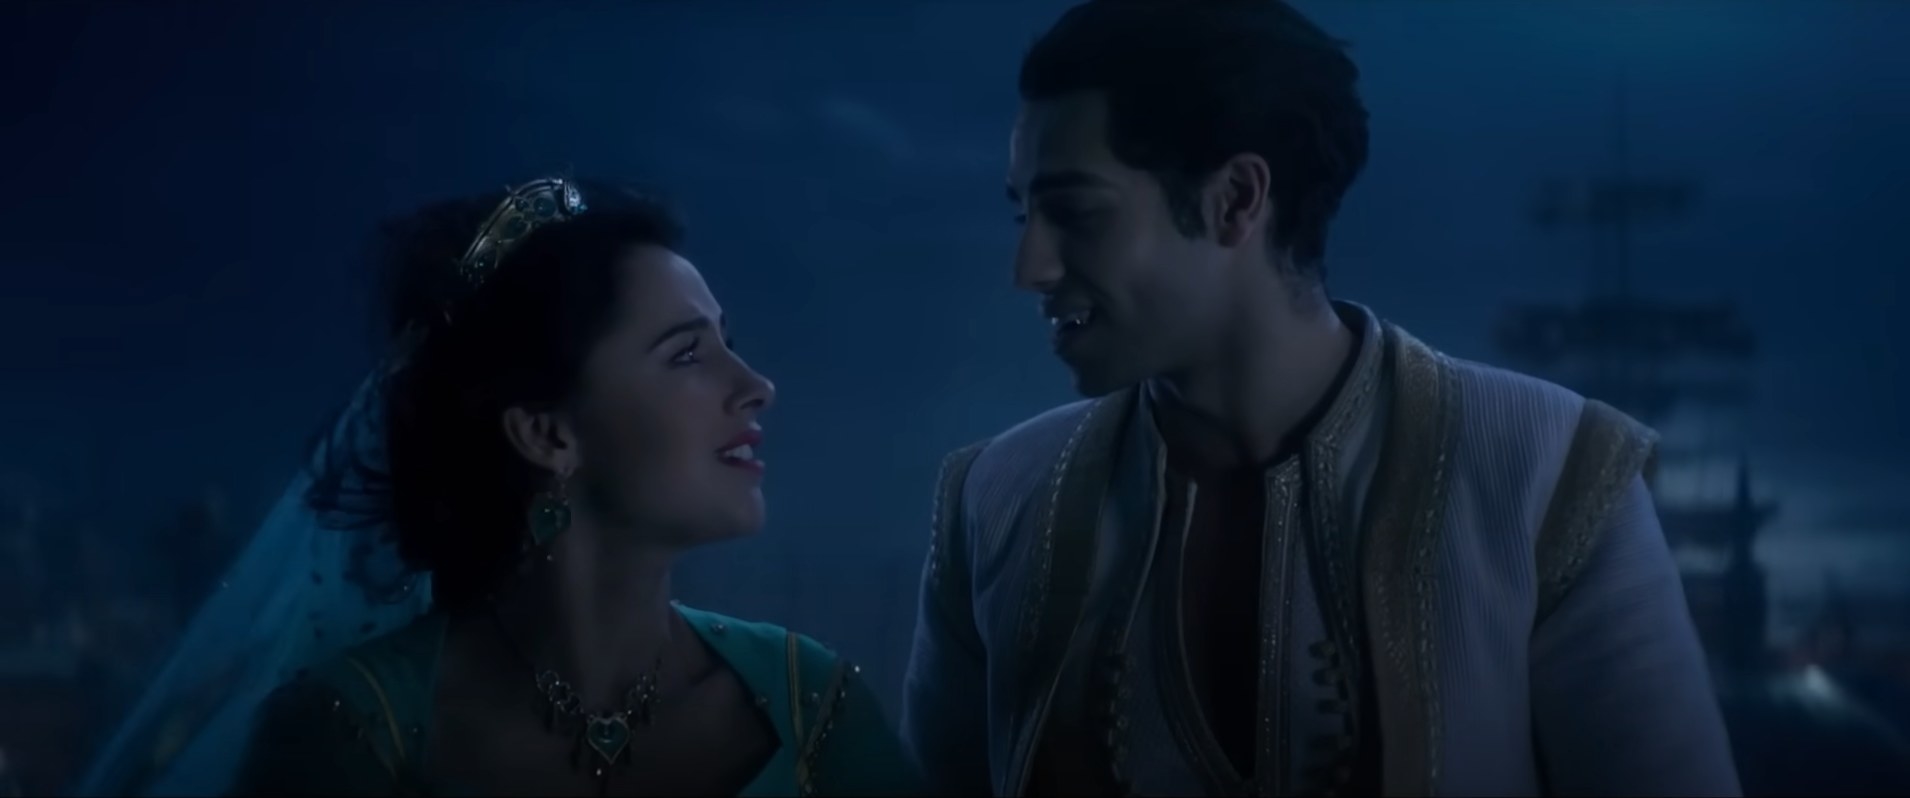 Jasmine and Aladdin from Disney&#x27;s movie look at each other, smiling, in a night scene. Jasmine wears a headband, Aladdin a vest